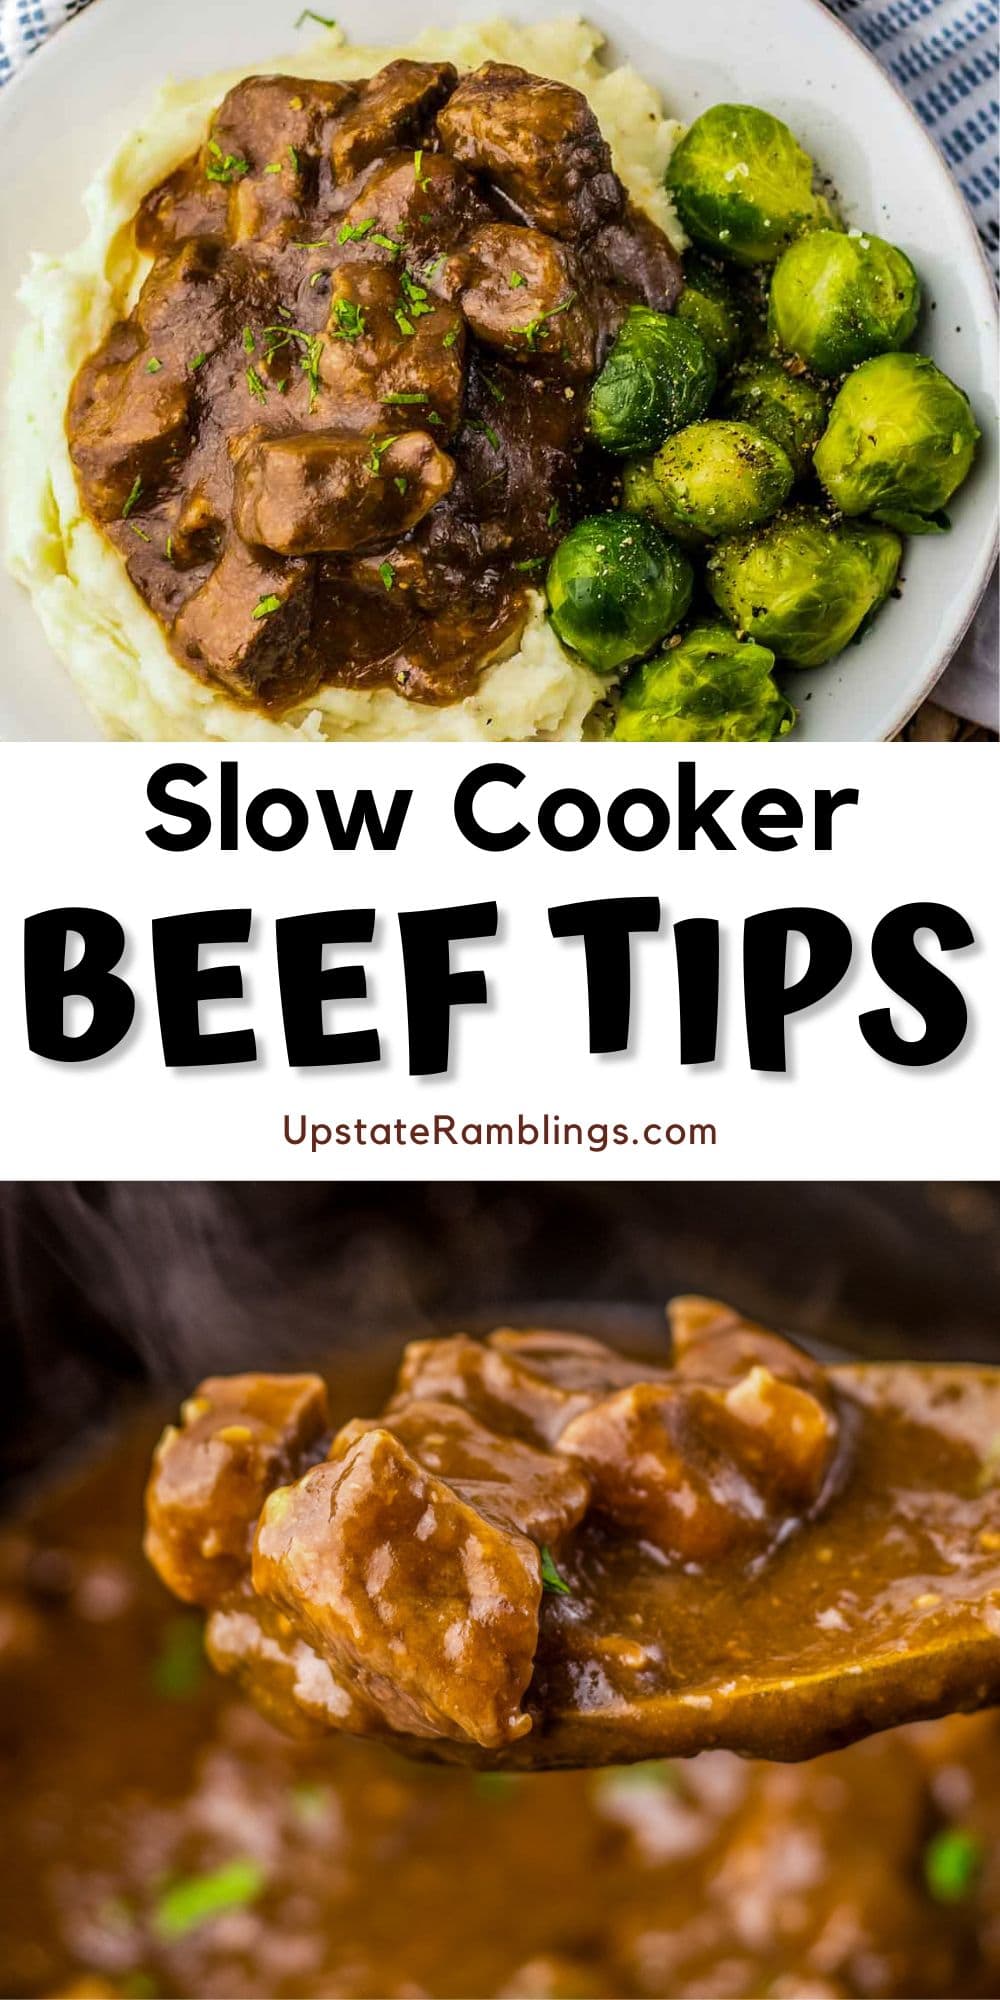 Slow Cooker Beef Tips Are Fall-Apart Tender - Upstate Ramblings